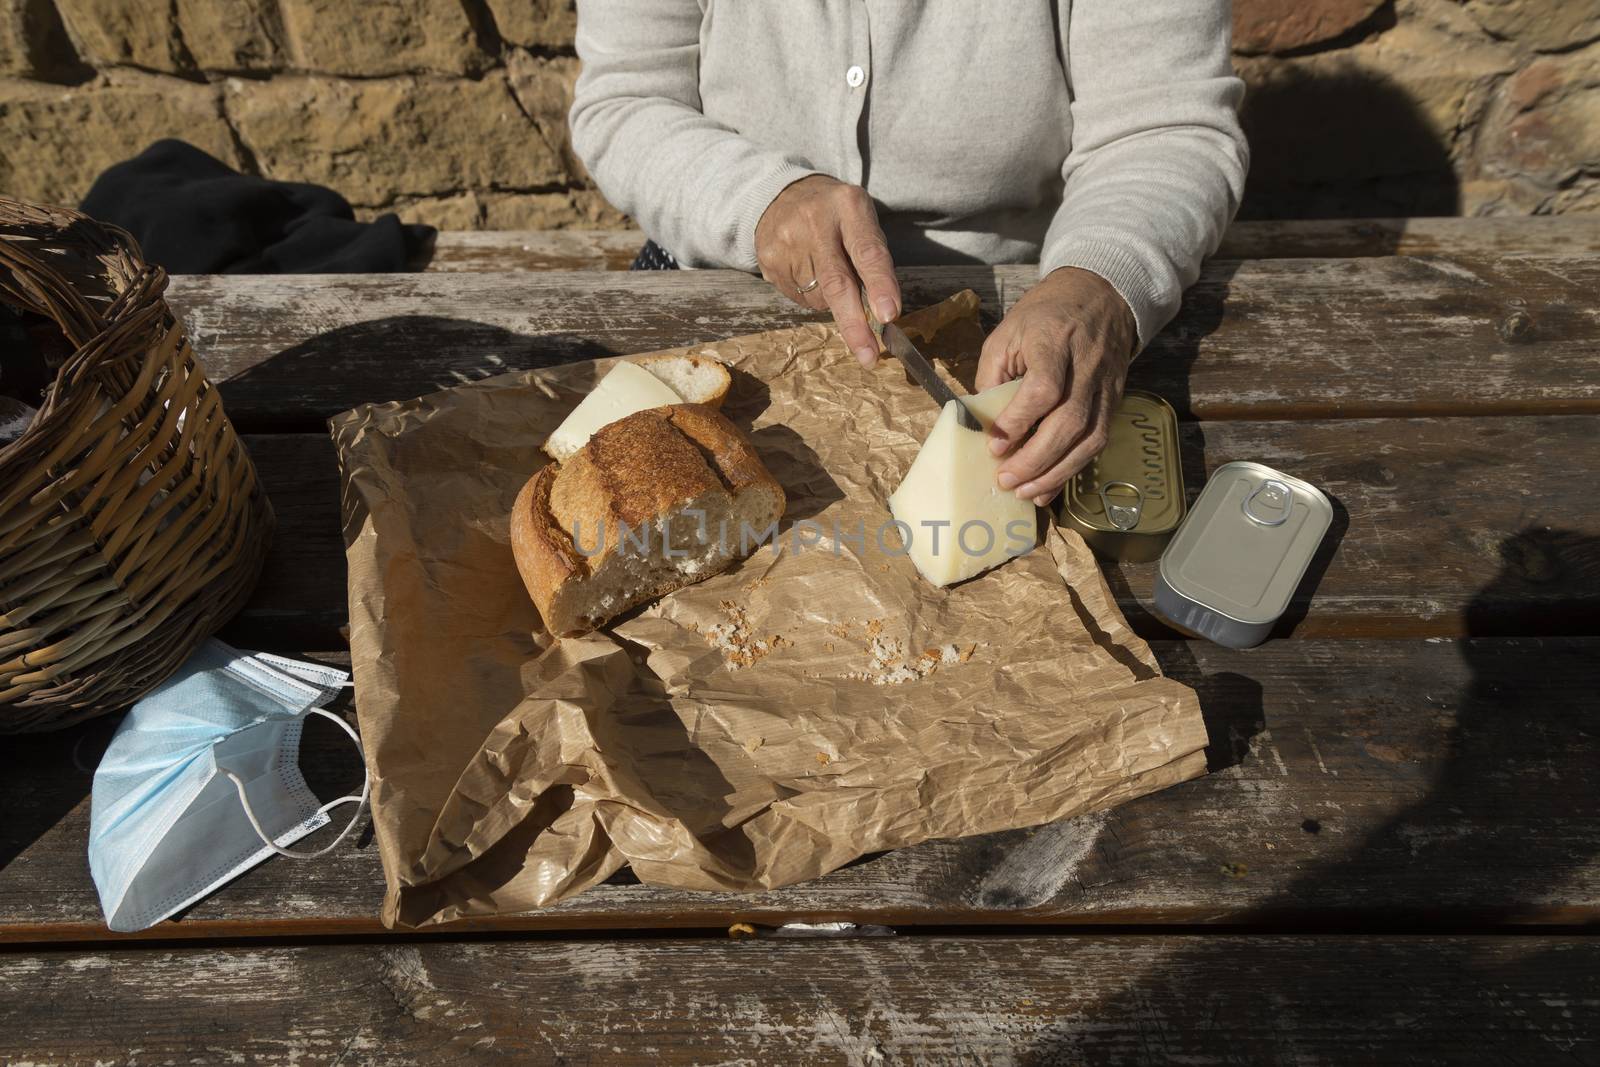 A senior woman, cuts slices of goat cheese at the mountain hut of the fountain of Artica, in Luesia, Spain.